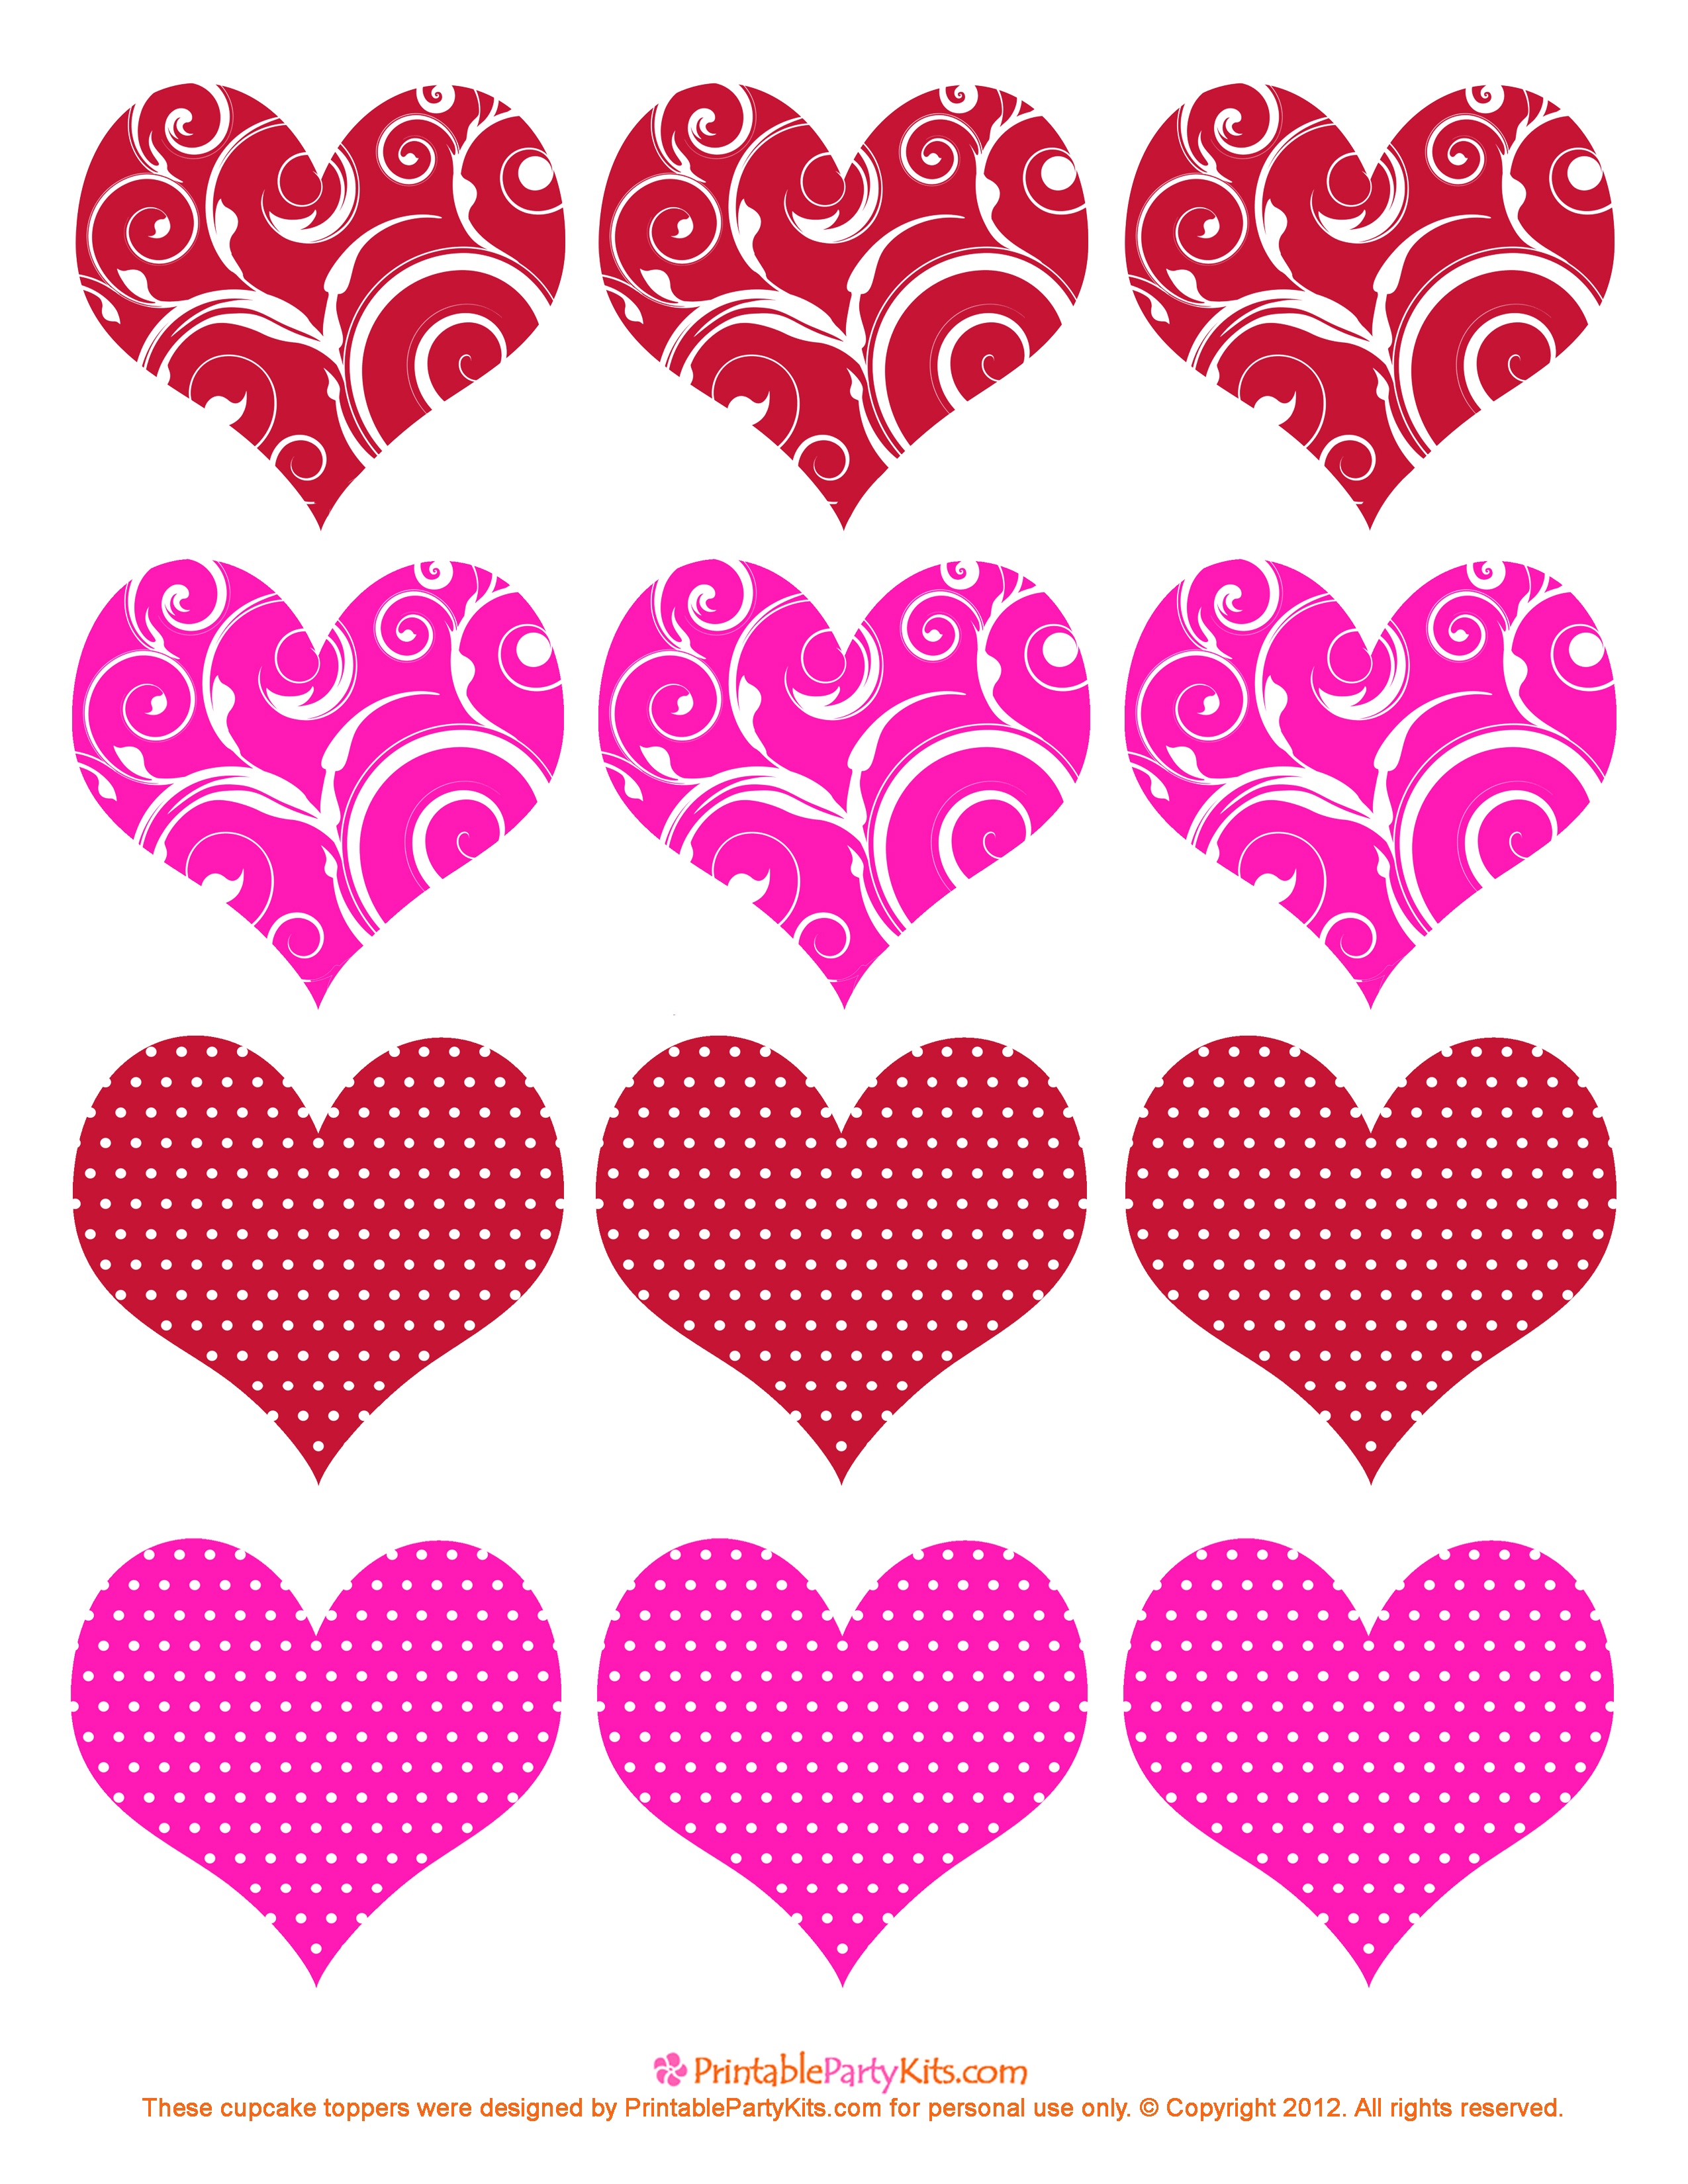 11 Valentine Heart Template Images - Free Printable Valentine Hearts - Free Printable Hearts